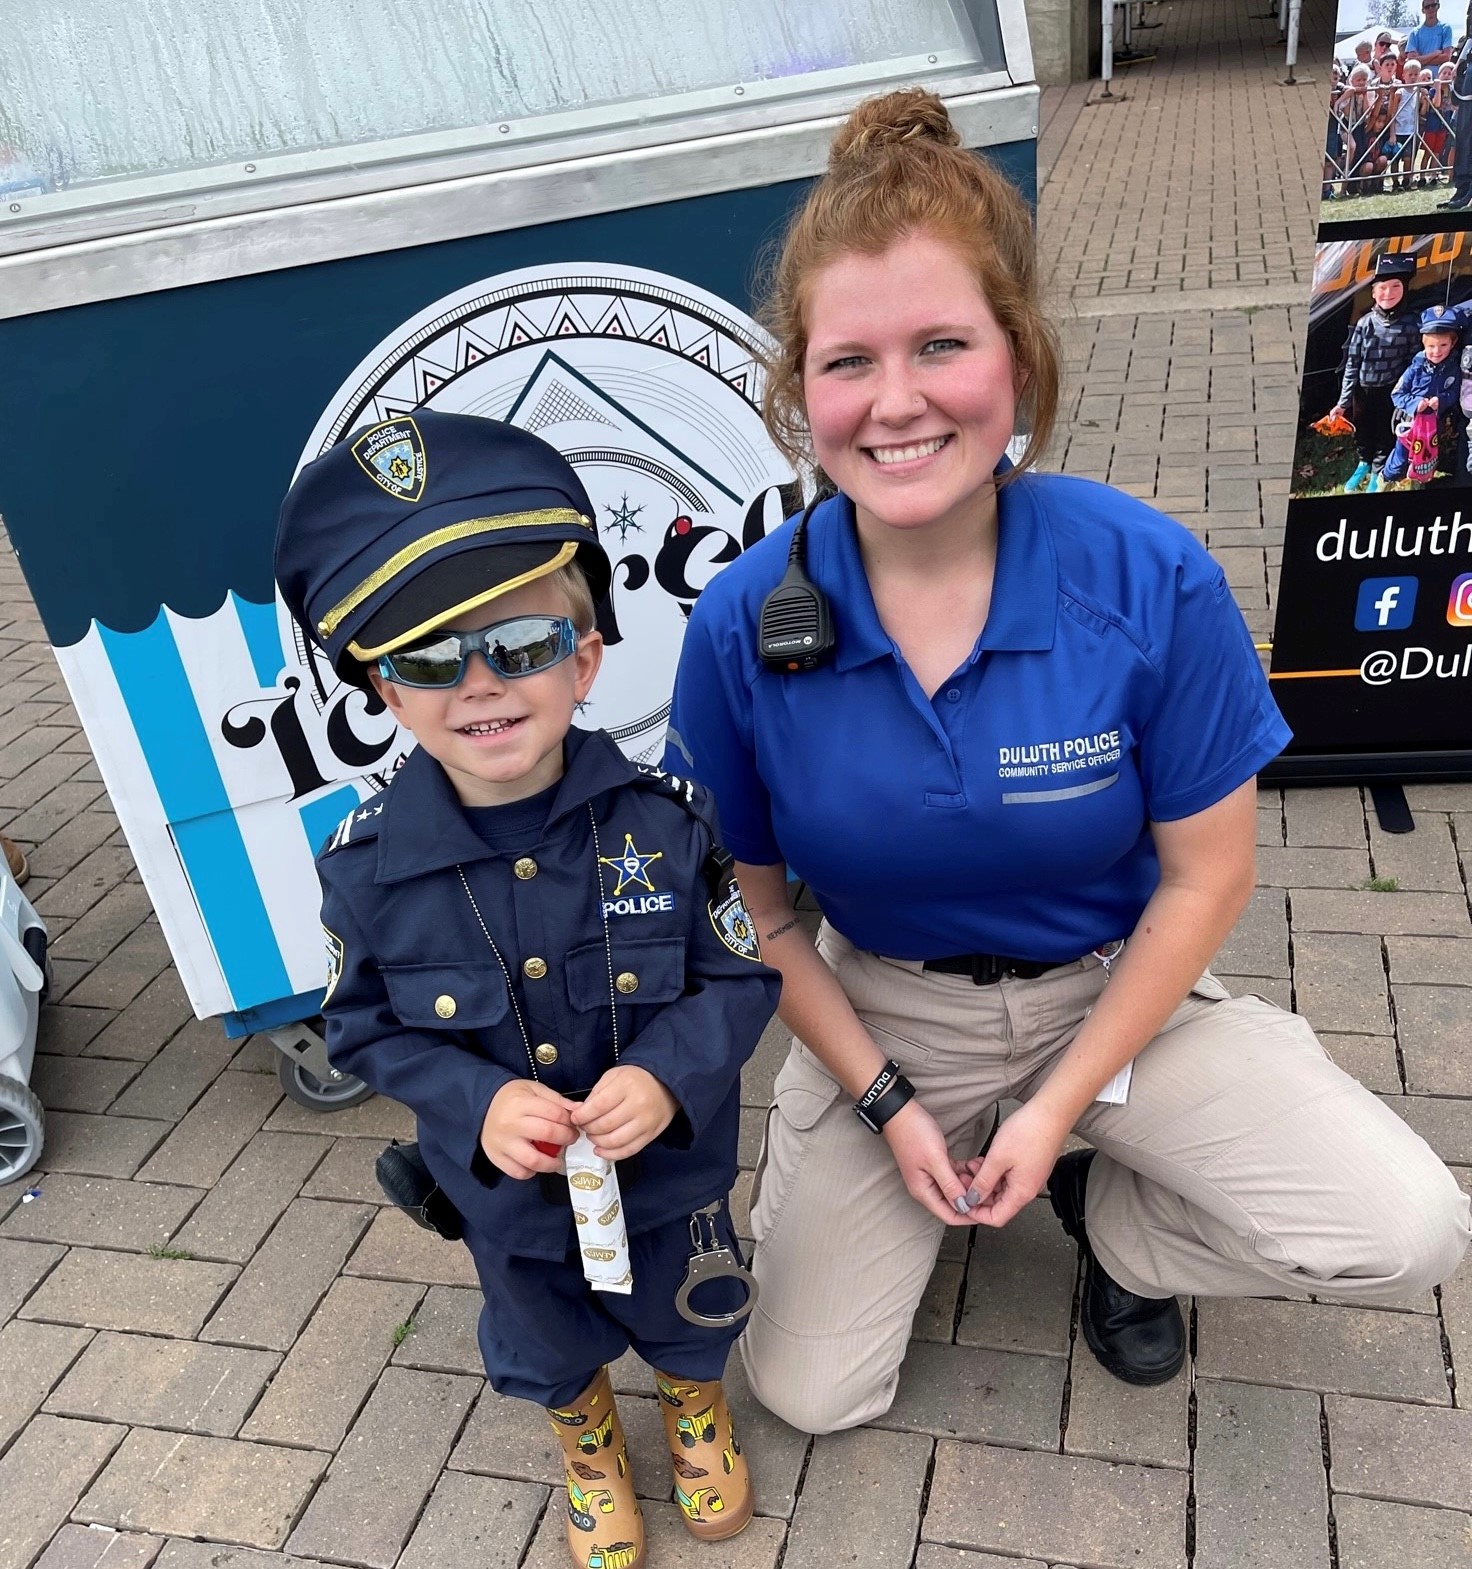 Community Service Officer-Intern Macie Vanburkirk (who is now a sworn police officer) snaps a picture with a 'Junior Officer'.